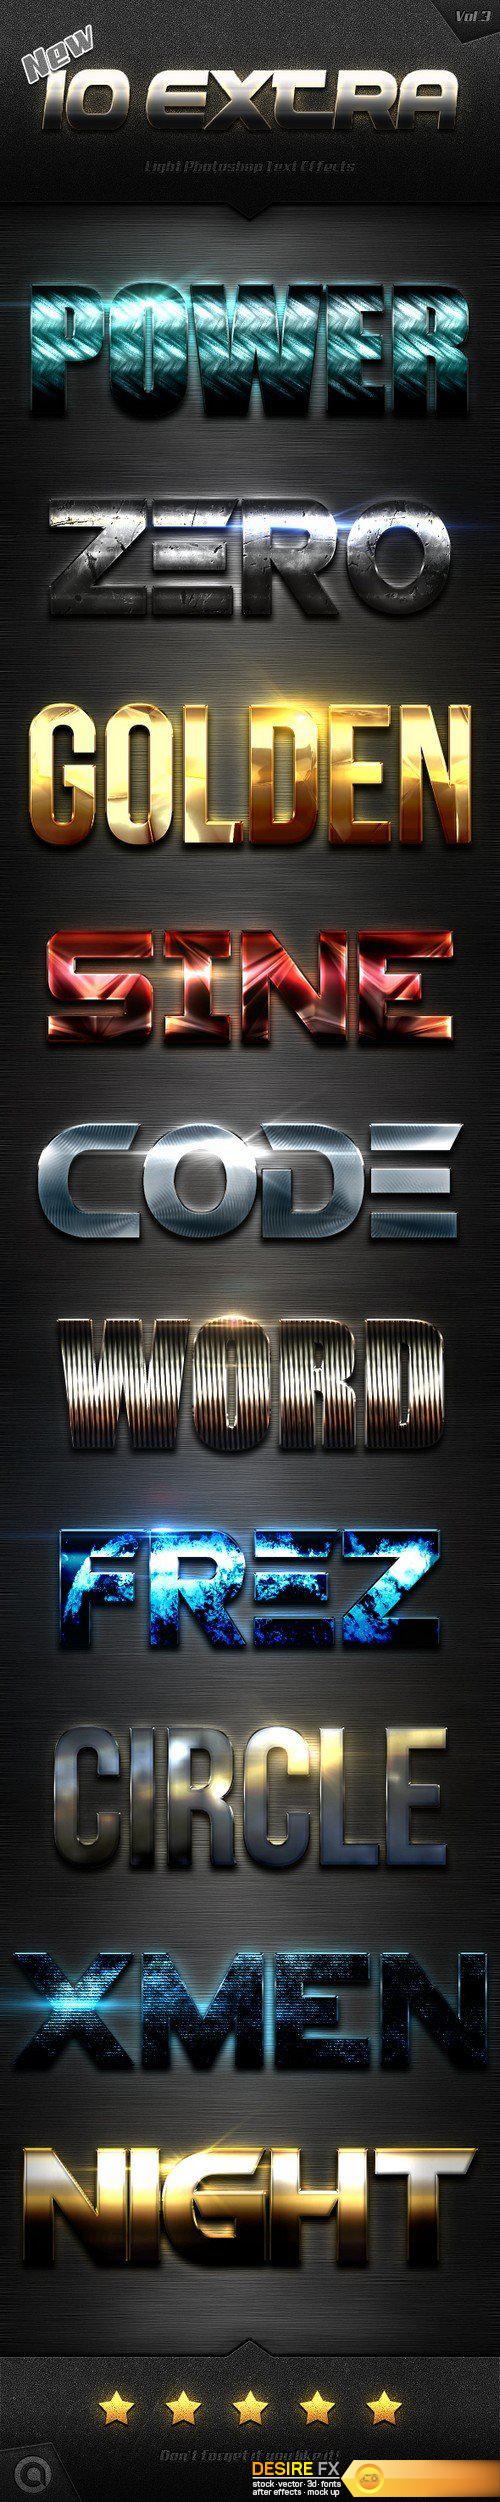 Graphicriver - New 10 Extra Light Text Effects Vol.3 19233130